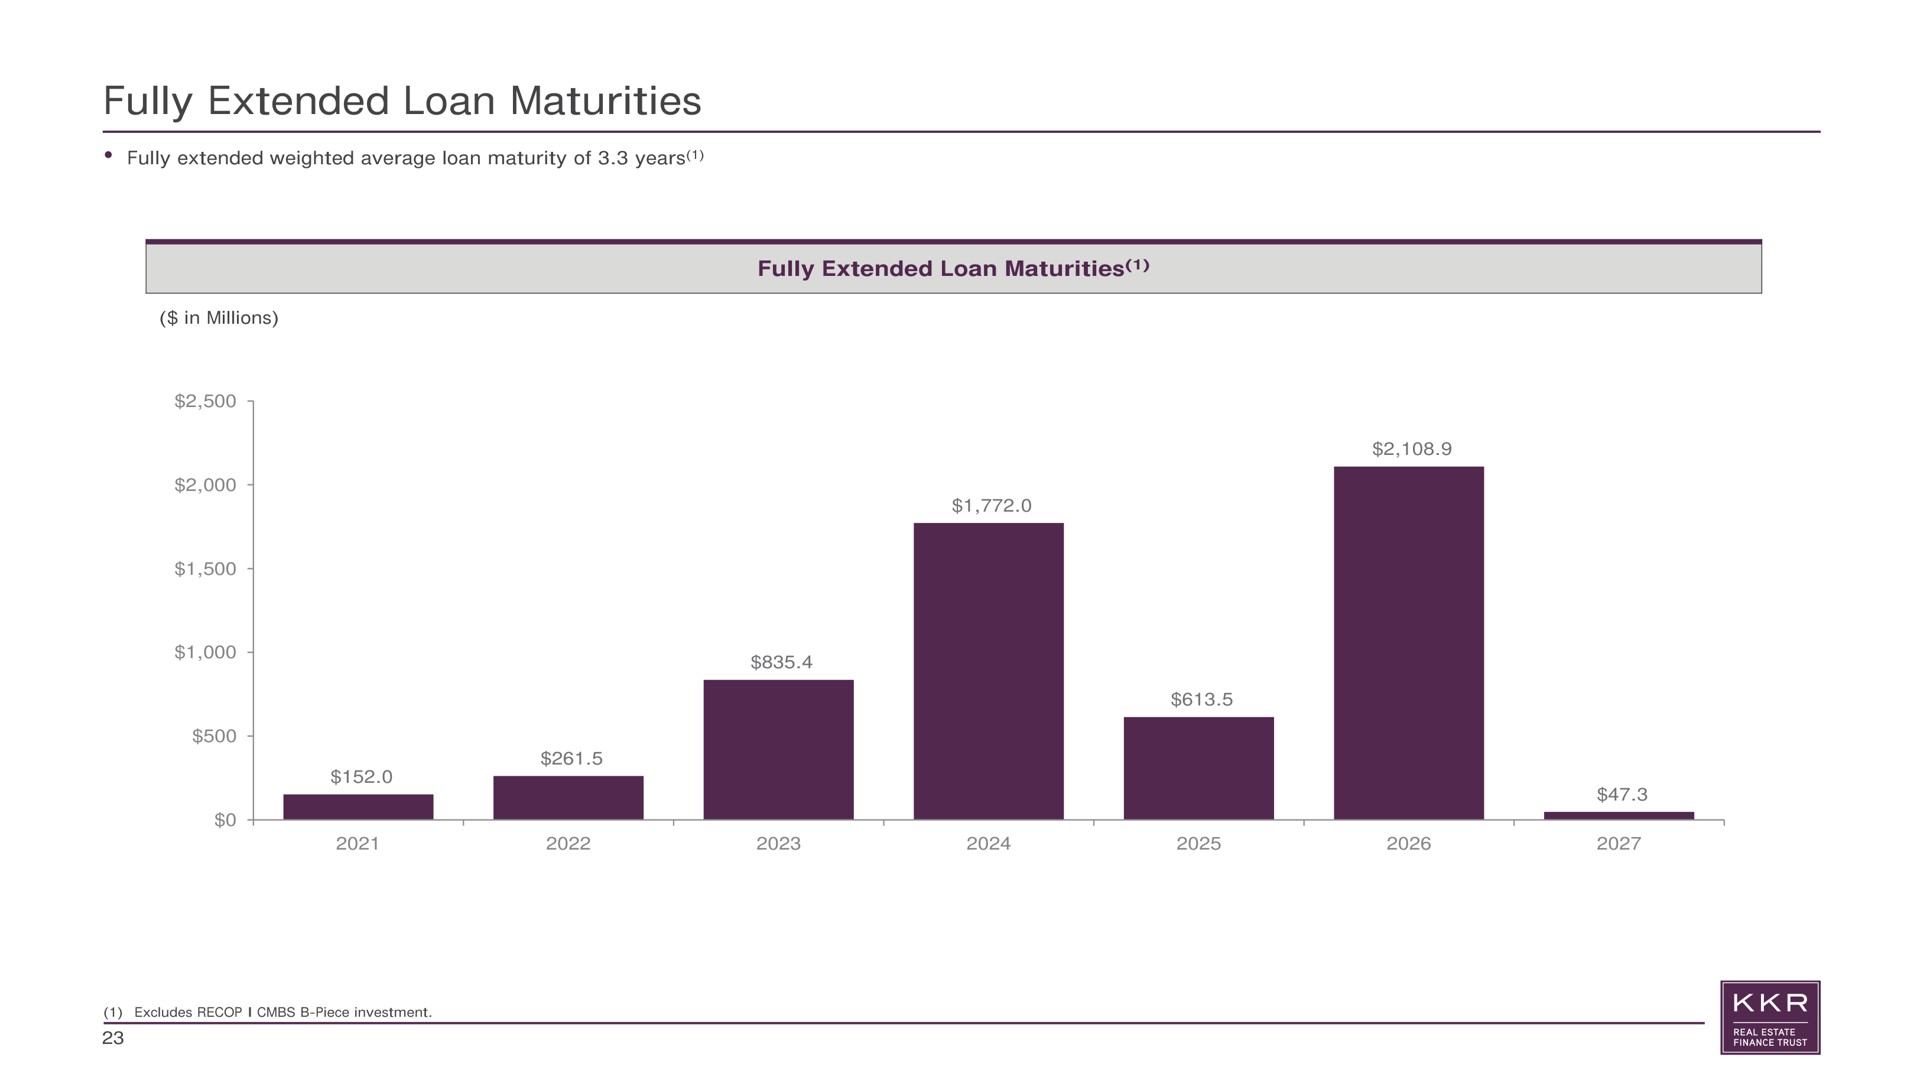 fully extended loan maturities fully extended loan maturities | KKR Real Estate Finance Trust